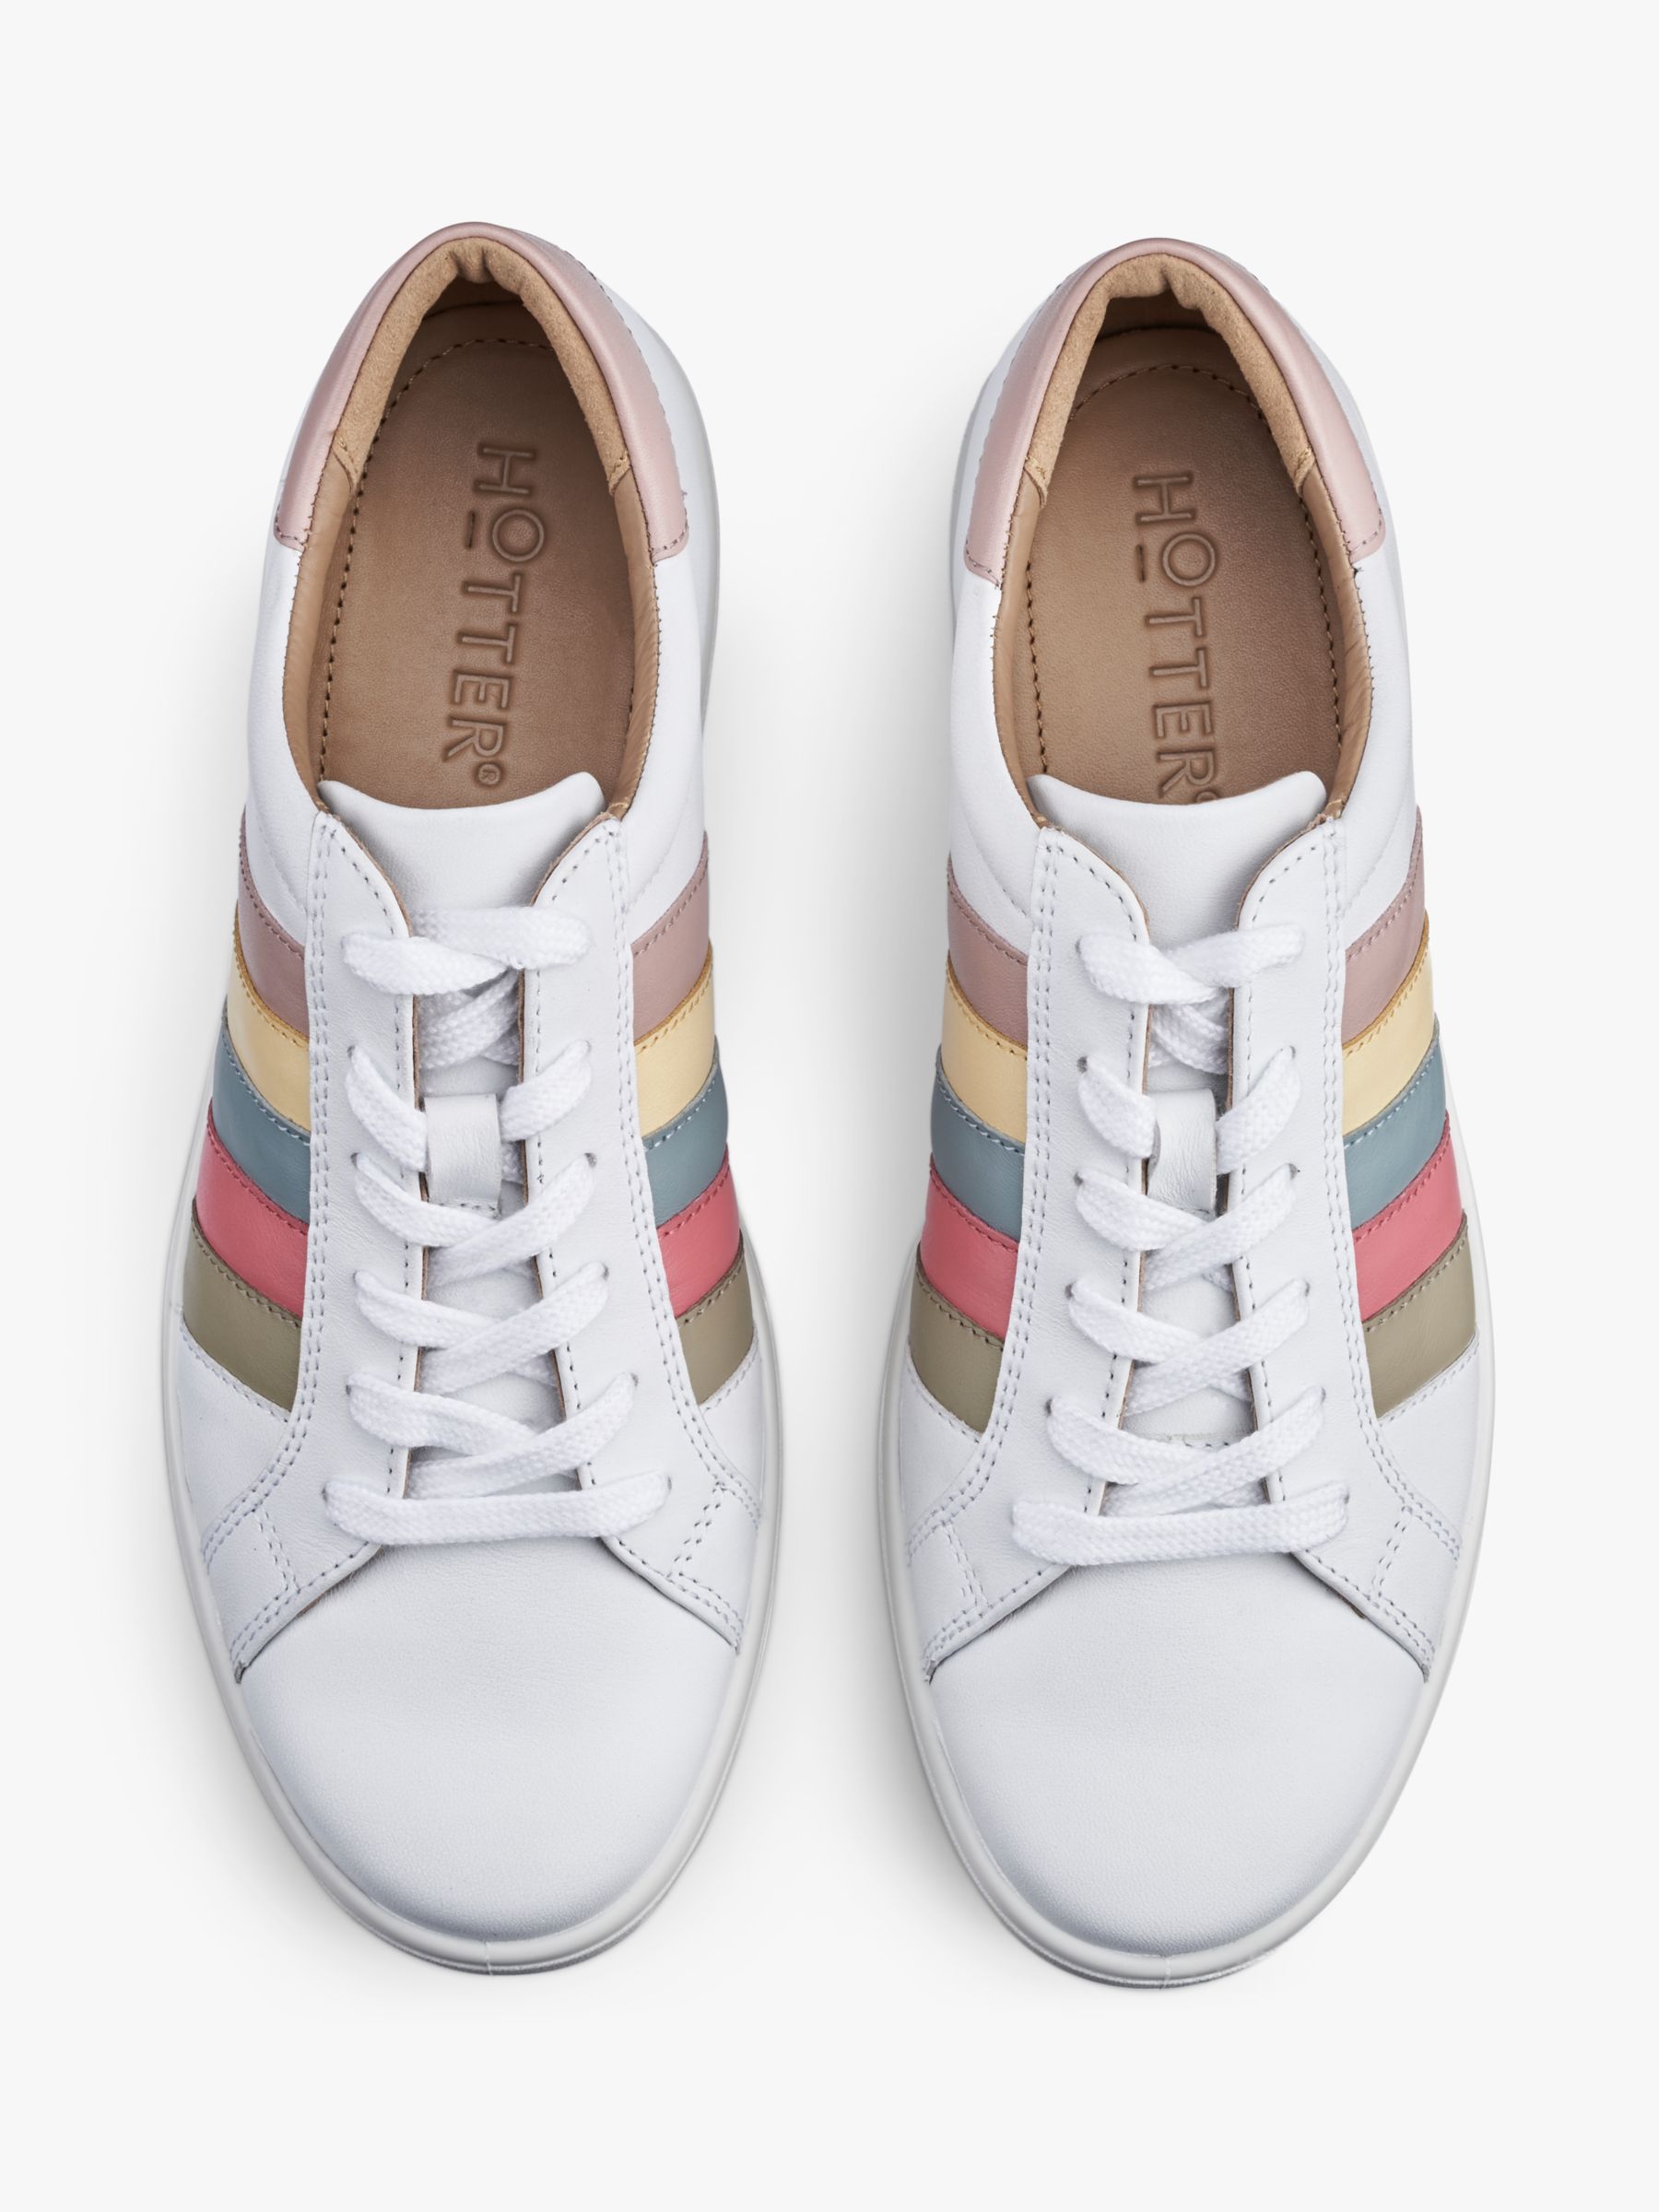 Buy Hotter Switch Leather Trainers Online at johnlewis.com